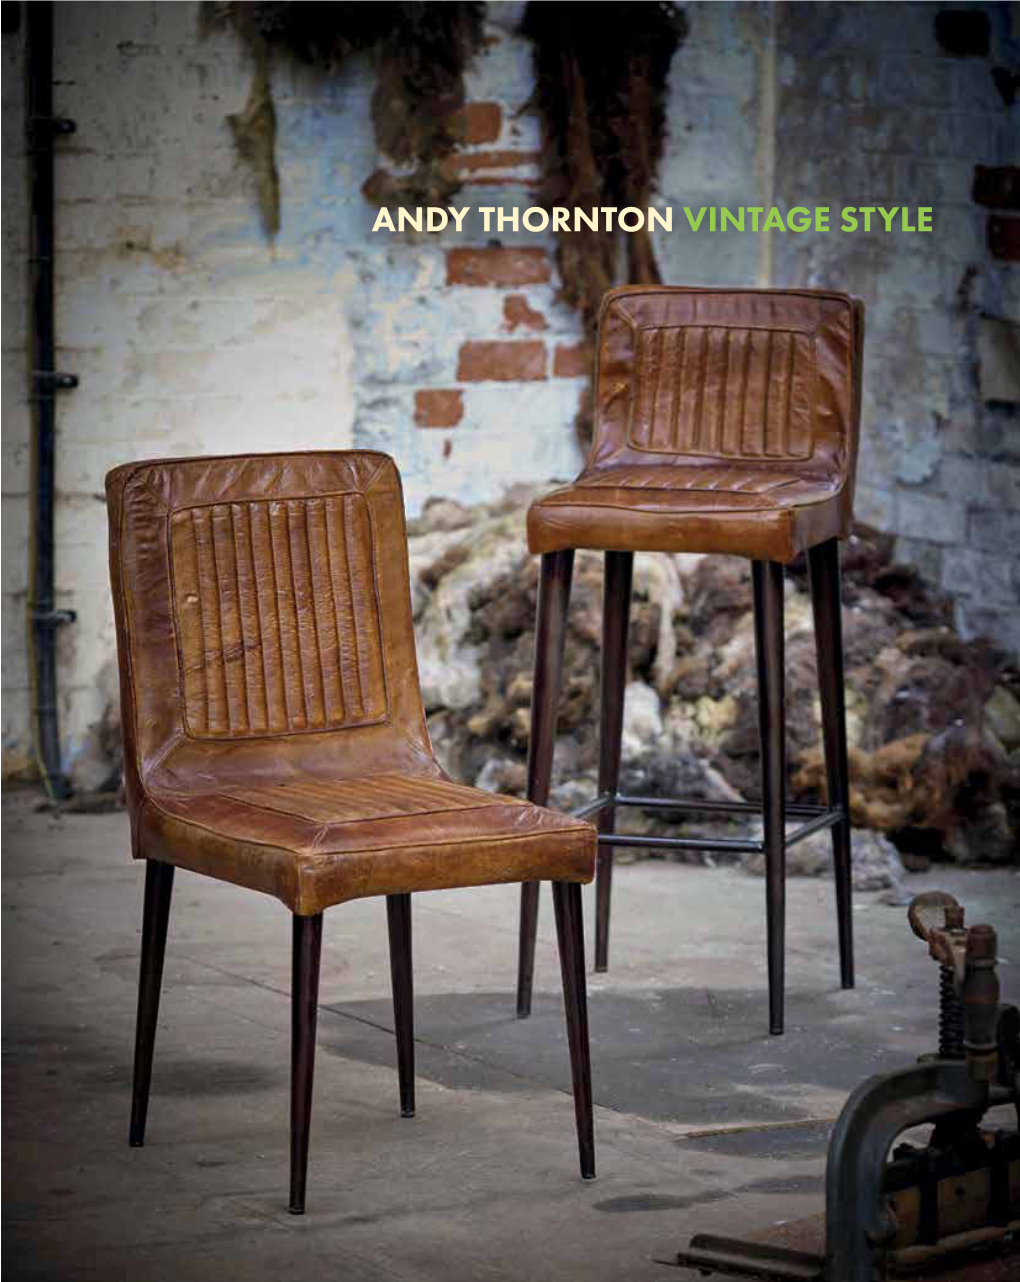 Andy Thornton Vintage Style